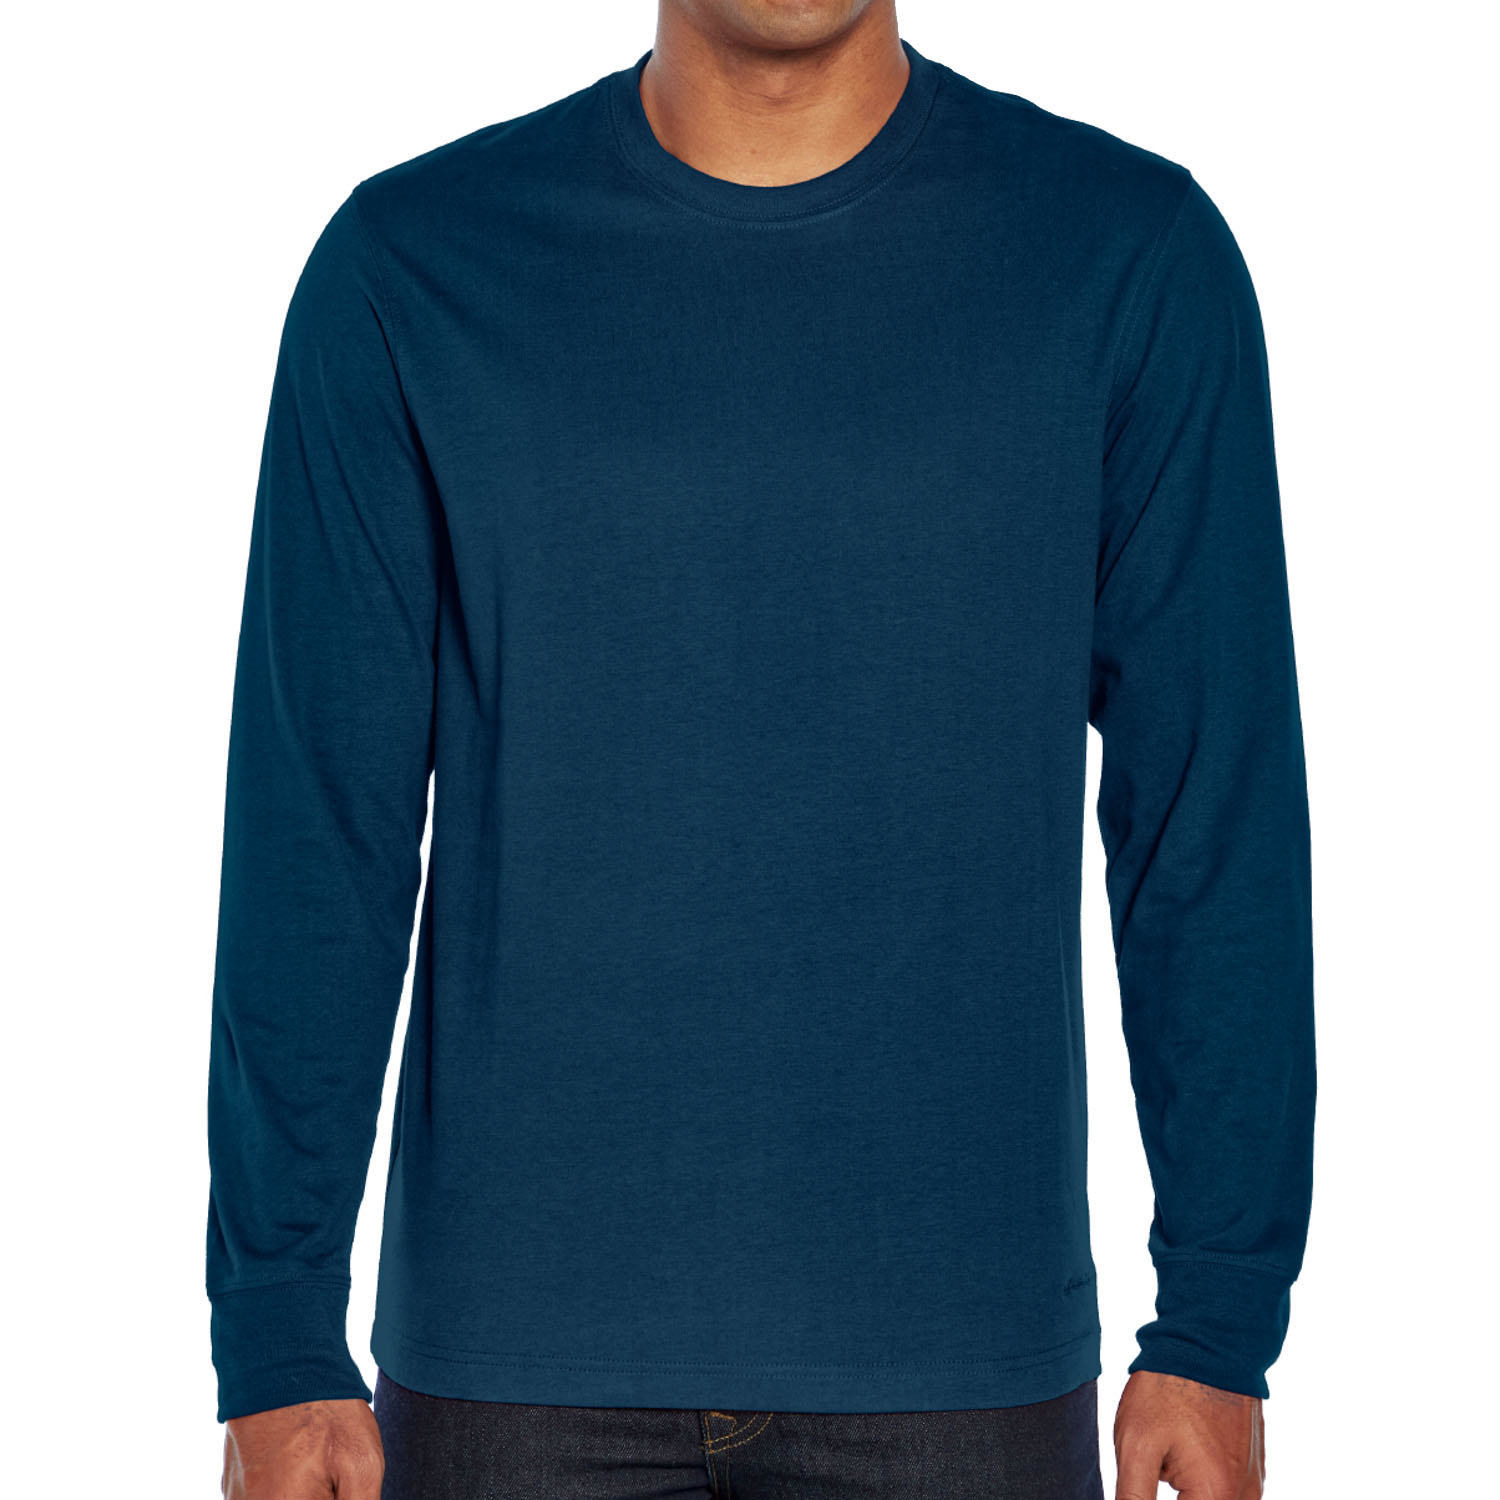 A long sleeve crewneck tee available in five sizes and six colors